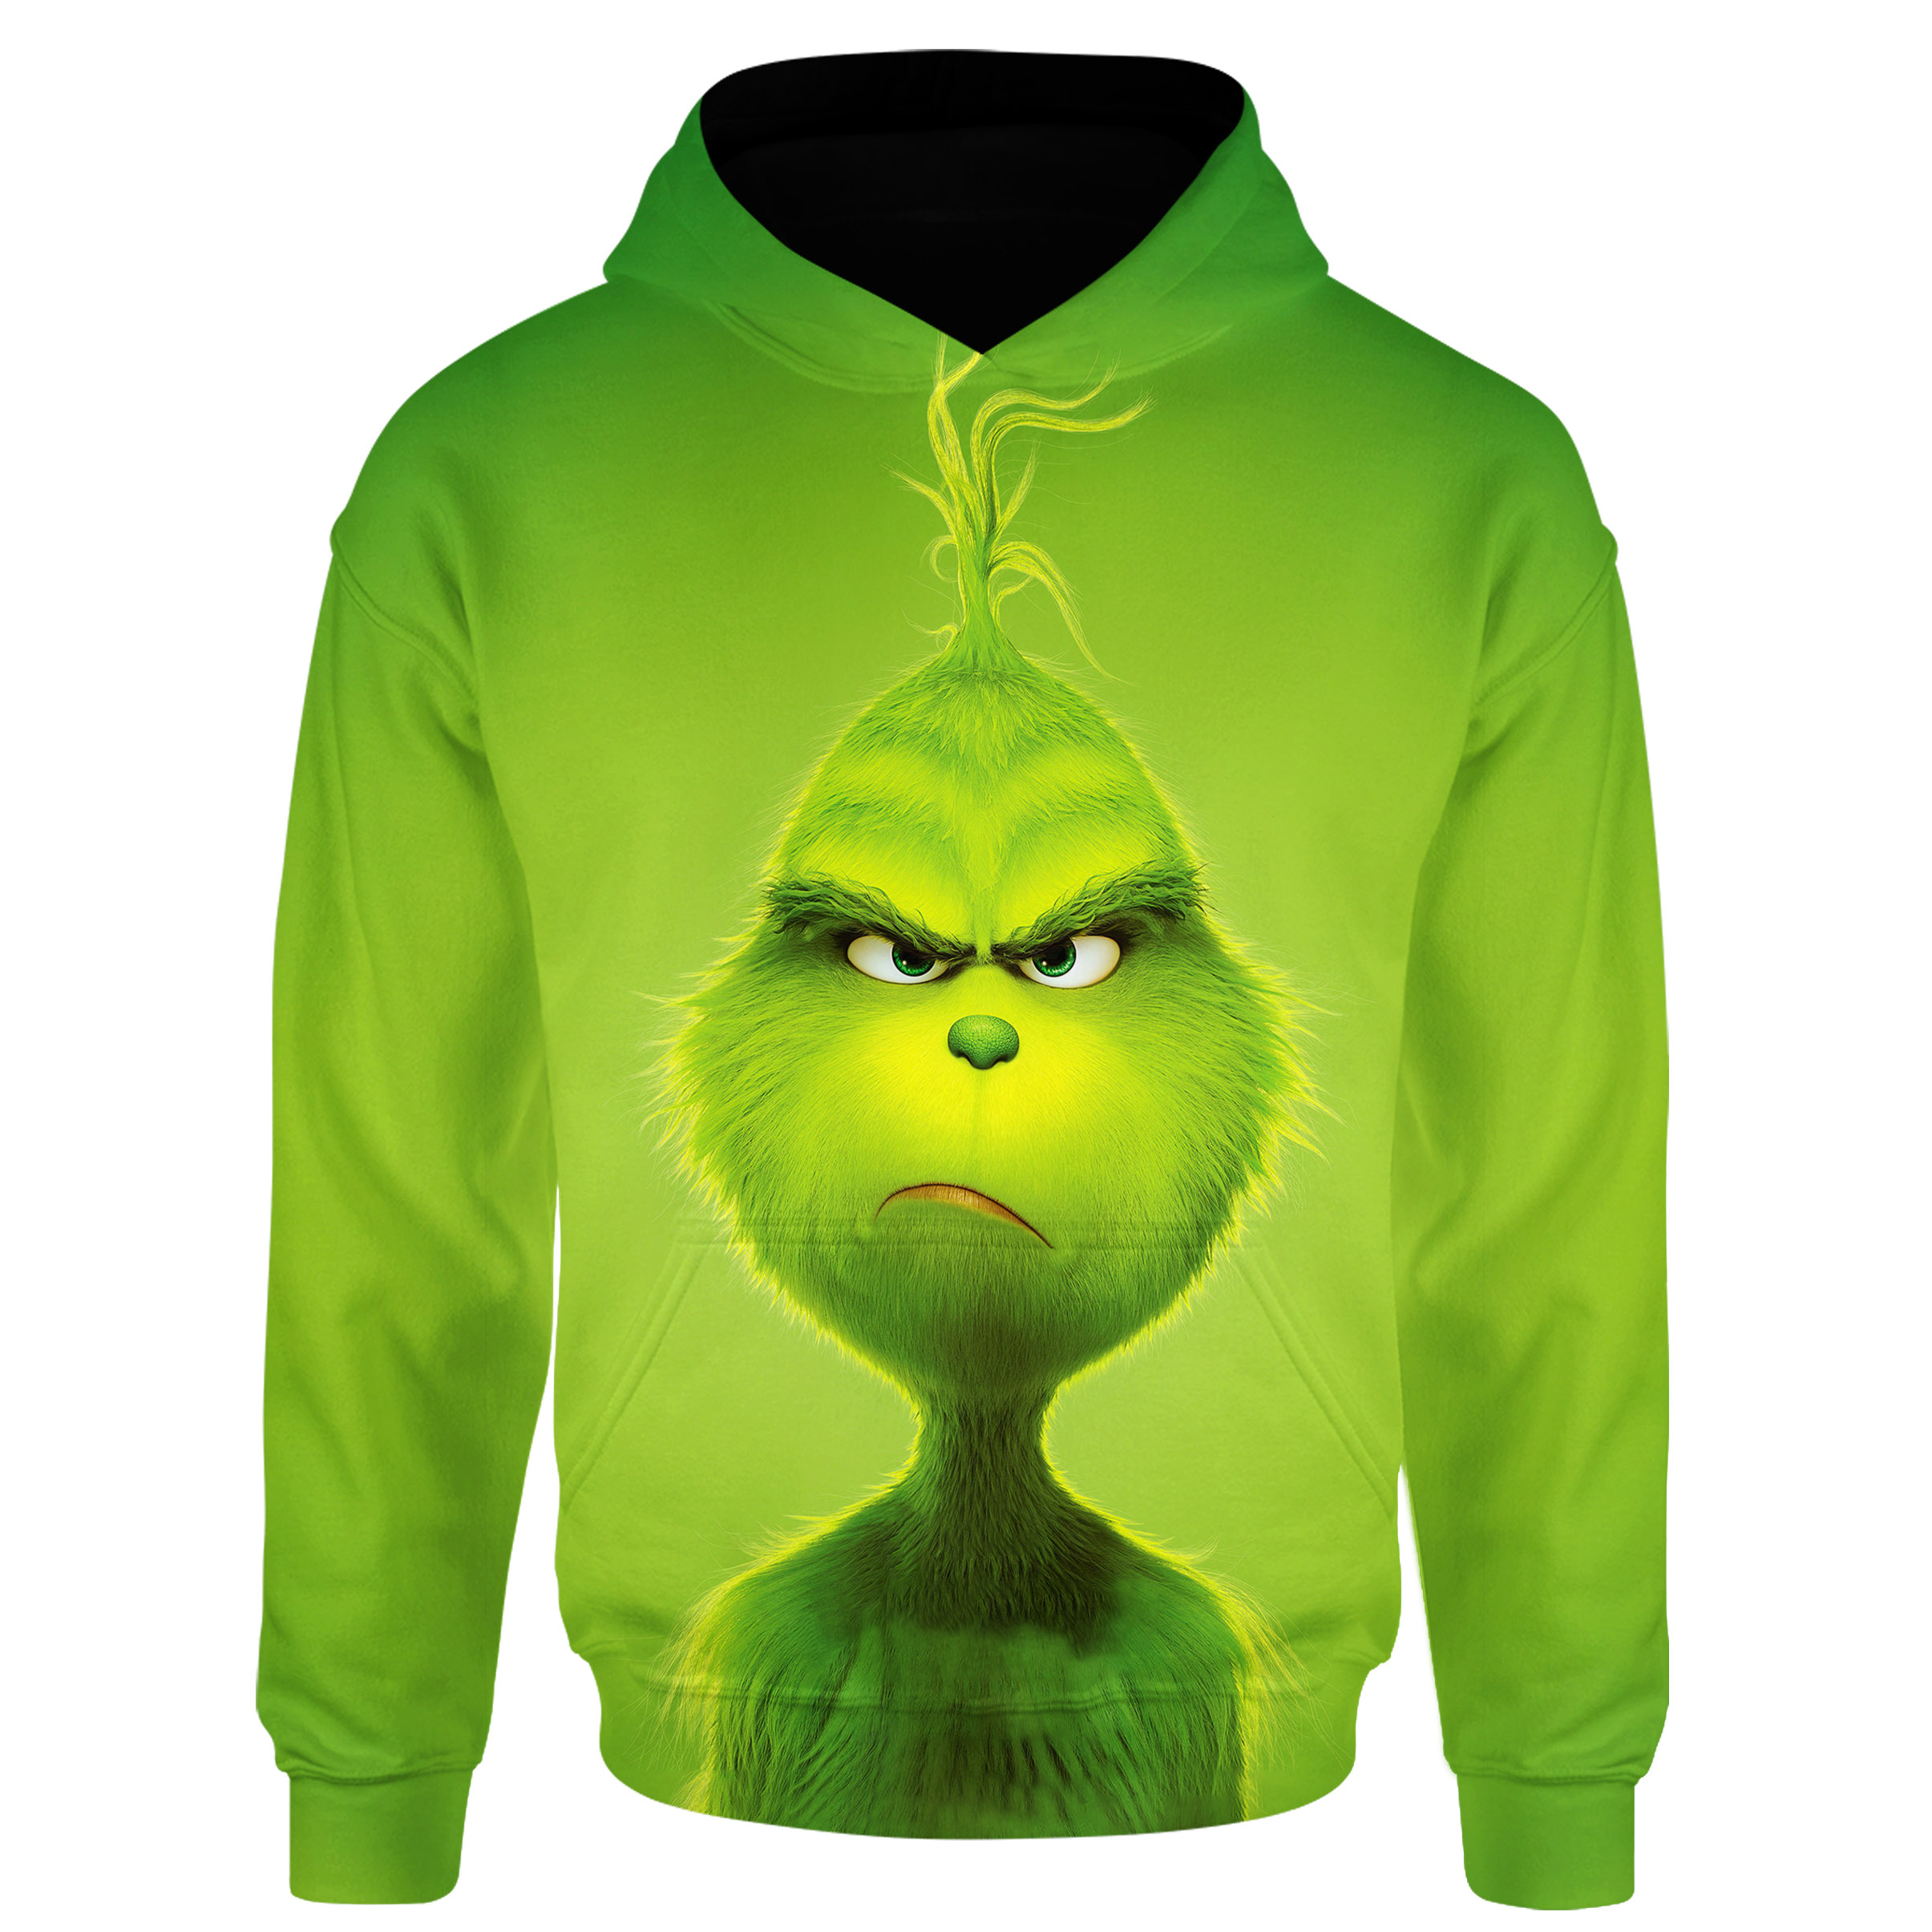 Dr. Seuss The Grinch Stole Christmas Ugly Hoodie All Over Print Shirt